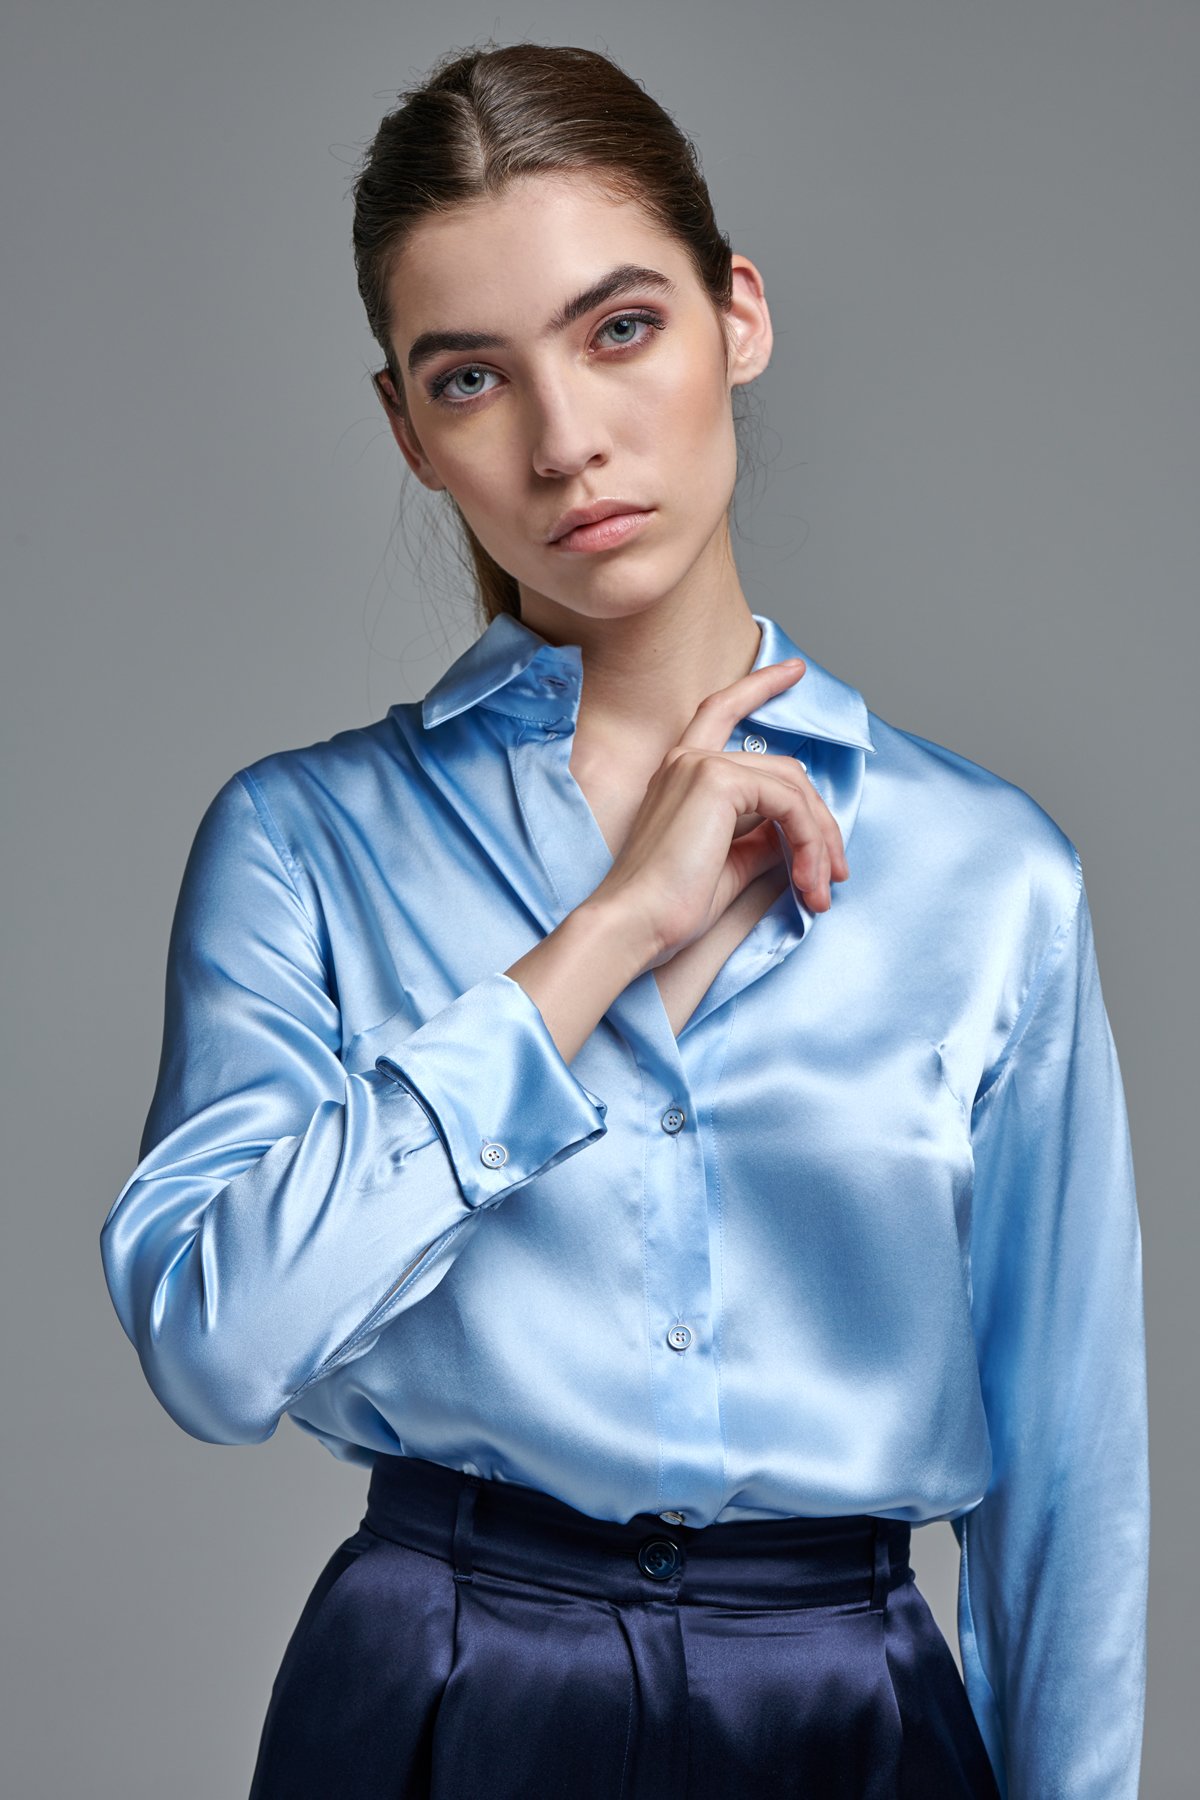 Classic Blouse - The full D.N.A collection - YARDEN MITRANI